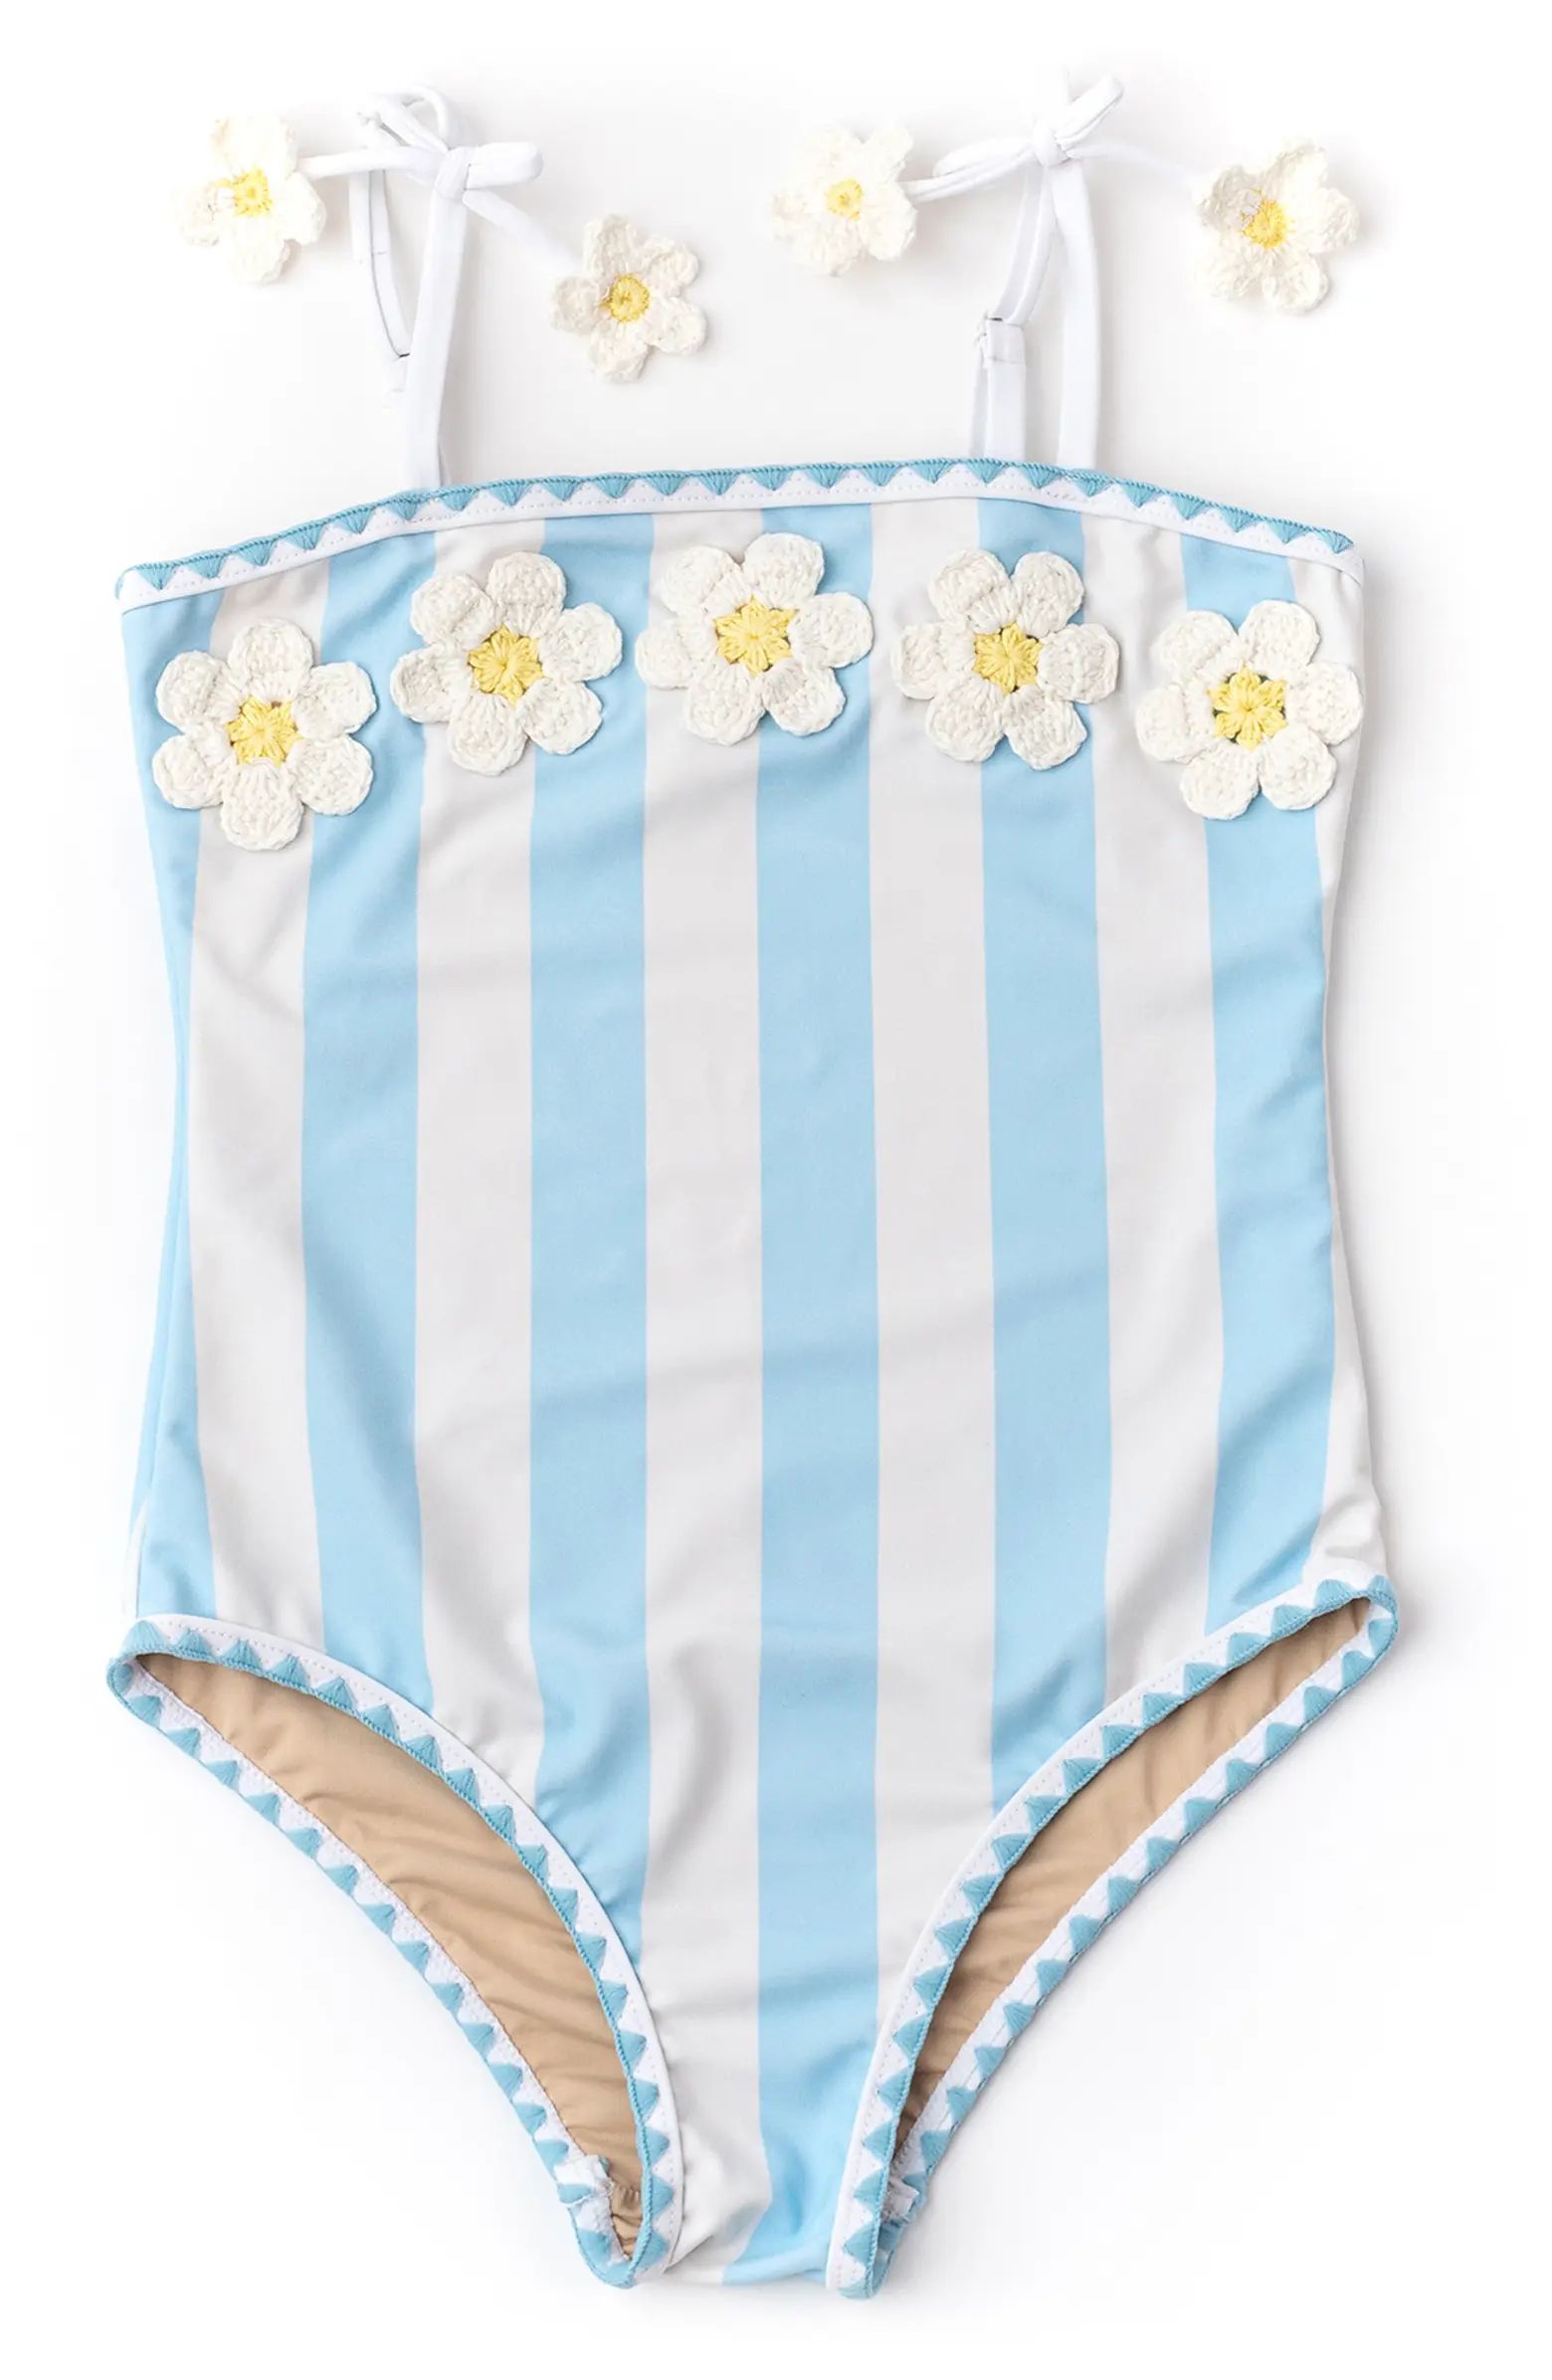 Shade Critters Kids' Cabana Daisy Stripe One-Piece Swimsuit | Nordstrom | Nordstrom